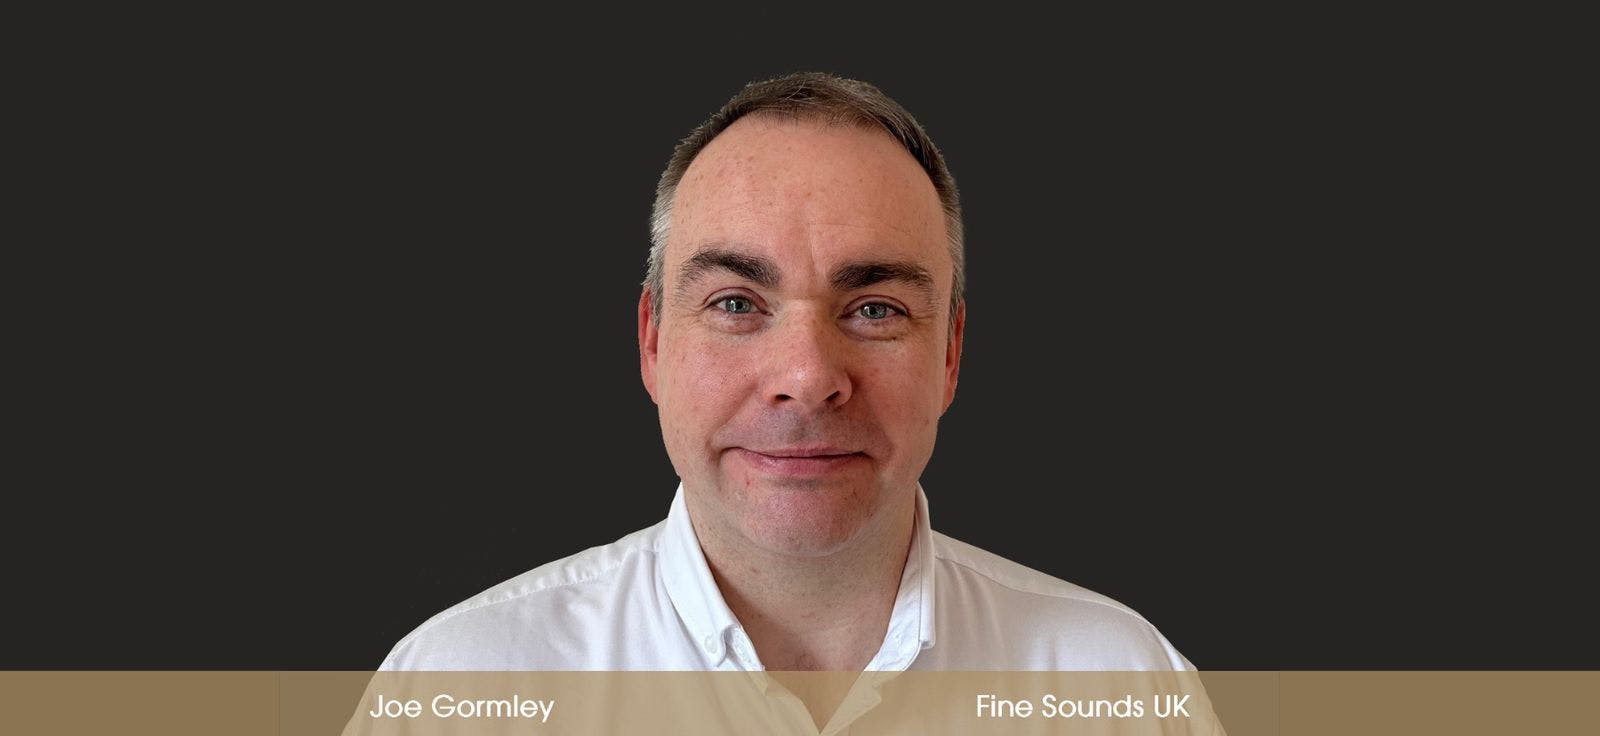 We are excited to welcome Joe Gormley to the Fine Sounds UK Team